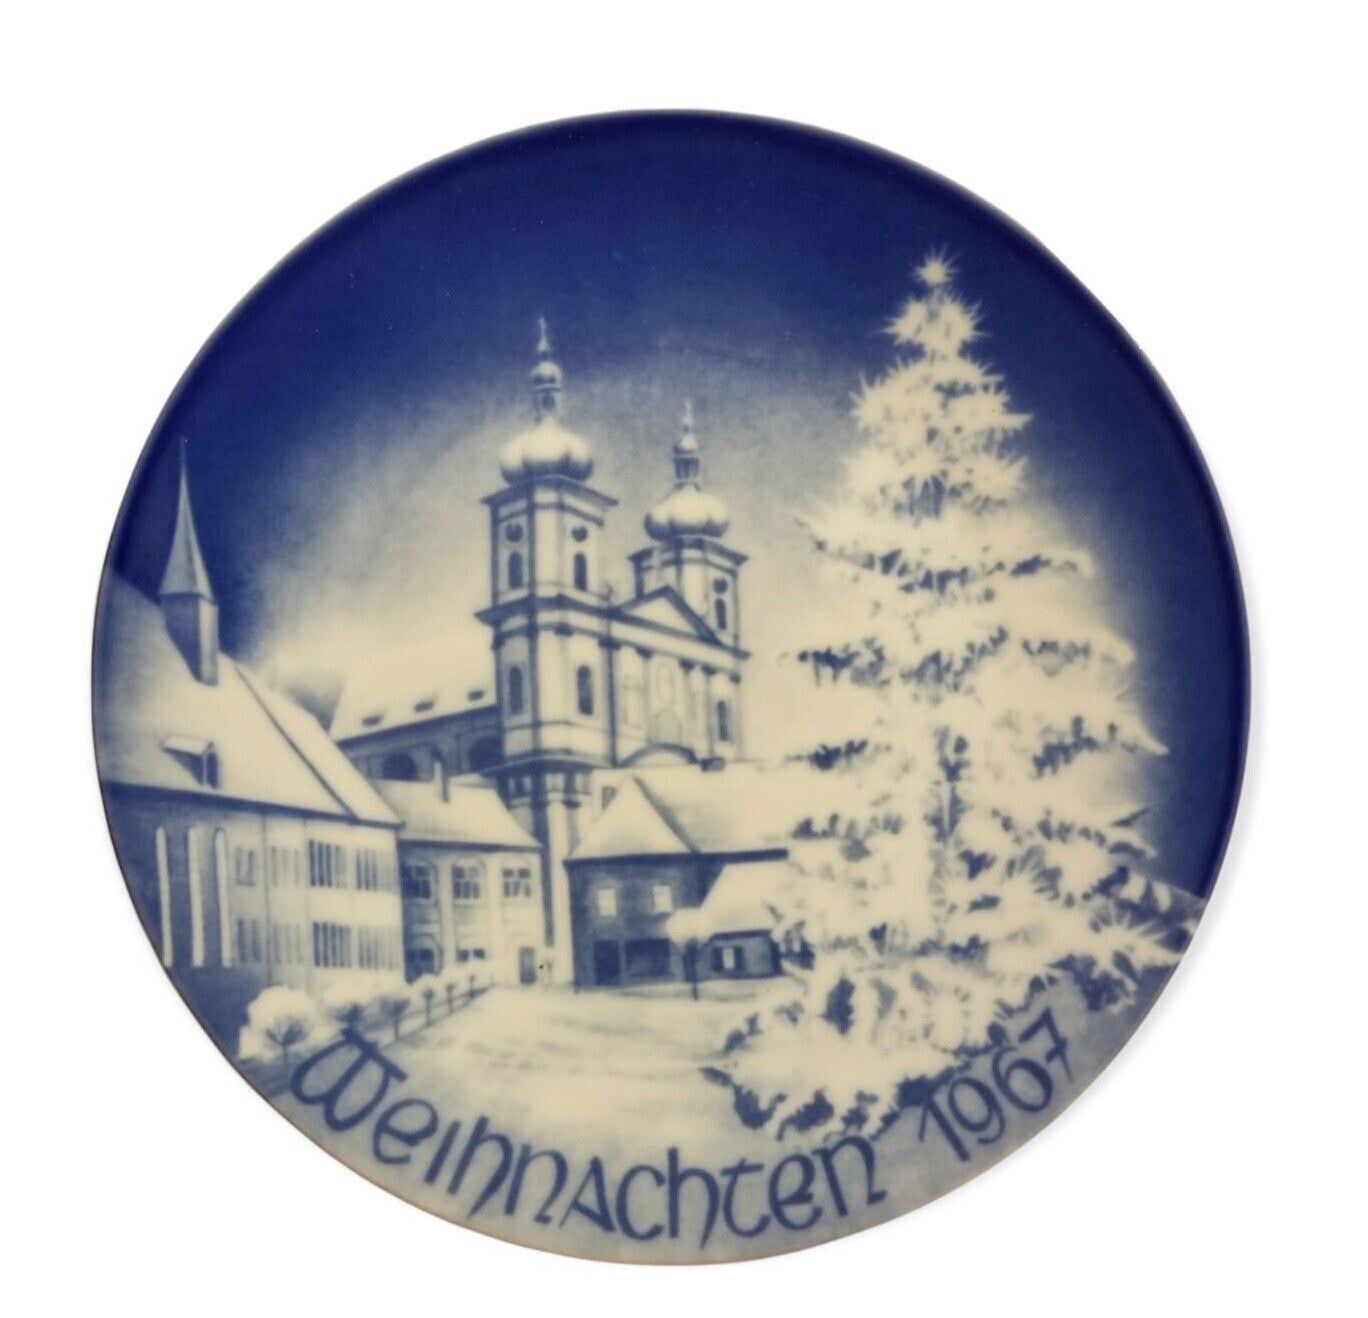 Bareuther Bavaria Germany 1967 Stiftskirche Church 8in Decor Plate